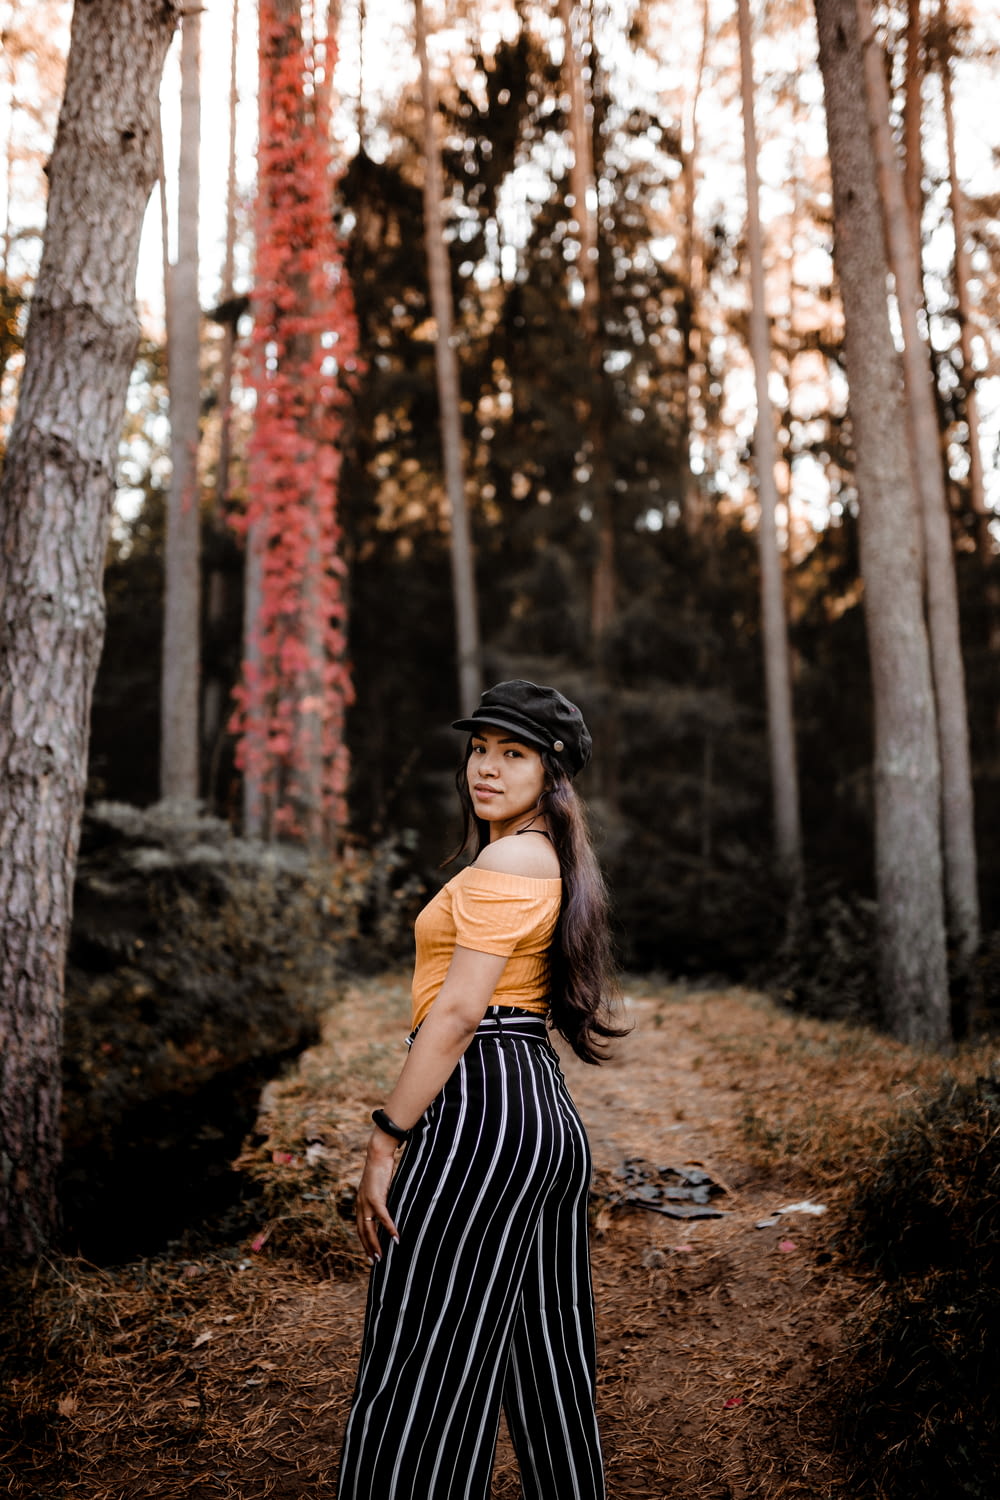 woman in black and white striped dress standing in forest during daytime